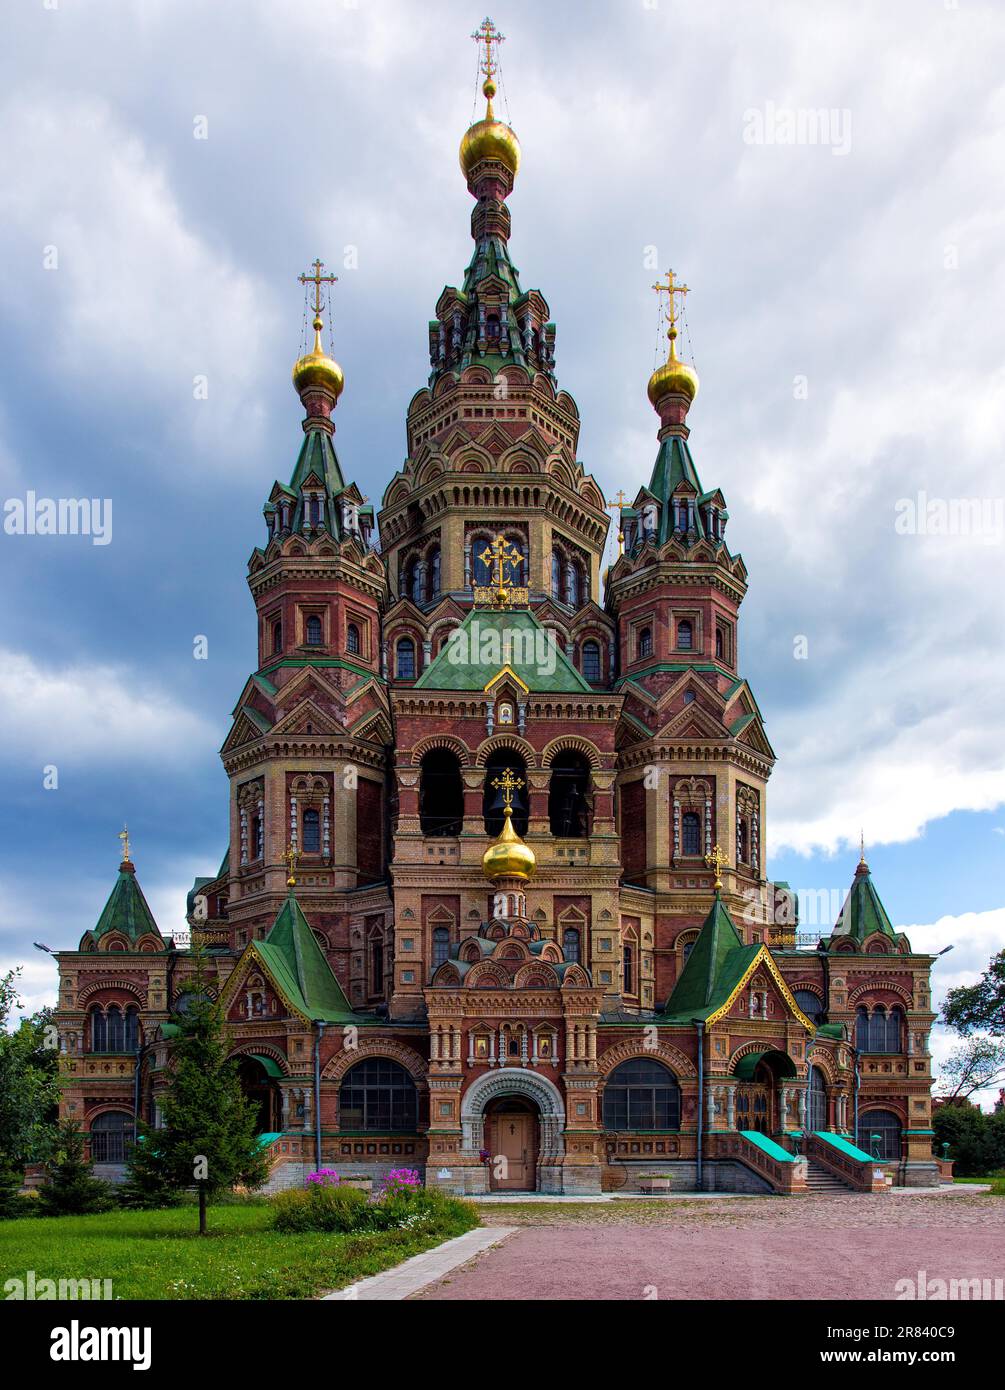 Saint Petersburg, Peter and Paul Cathedral. Saint Petersburg, Peter and Paul Cathedral (Peterhof) Stock Photo